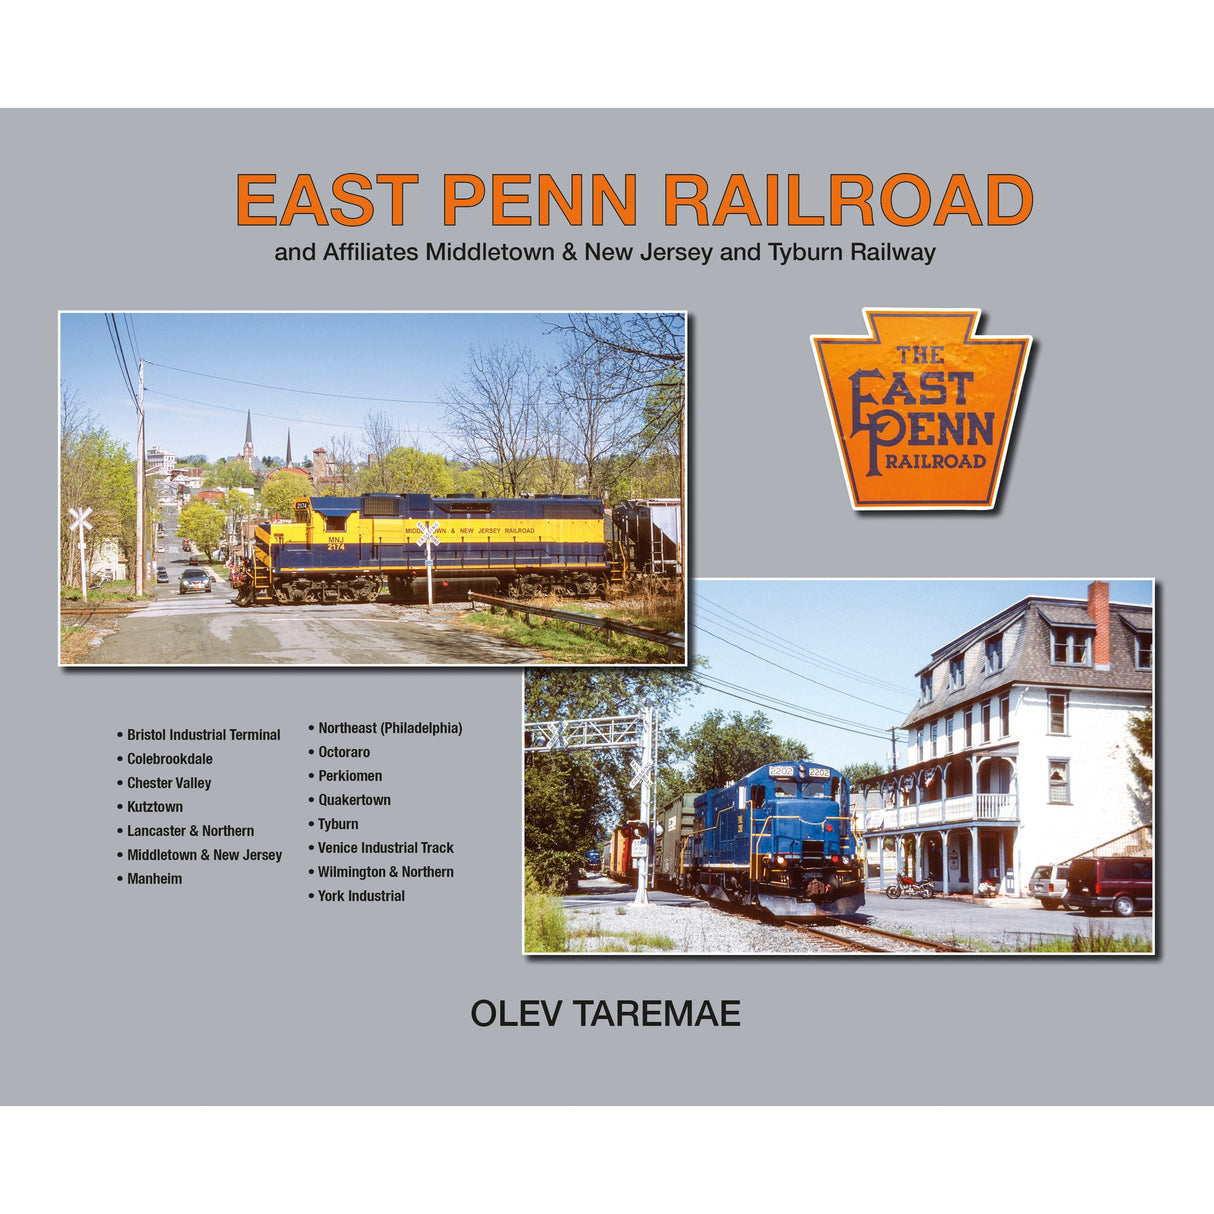 Morning Sun Books East Penn Railroad and Affiliates Middletown & New Jersey and Tyburn Railway (Softcover)